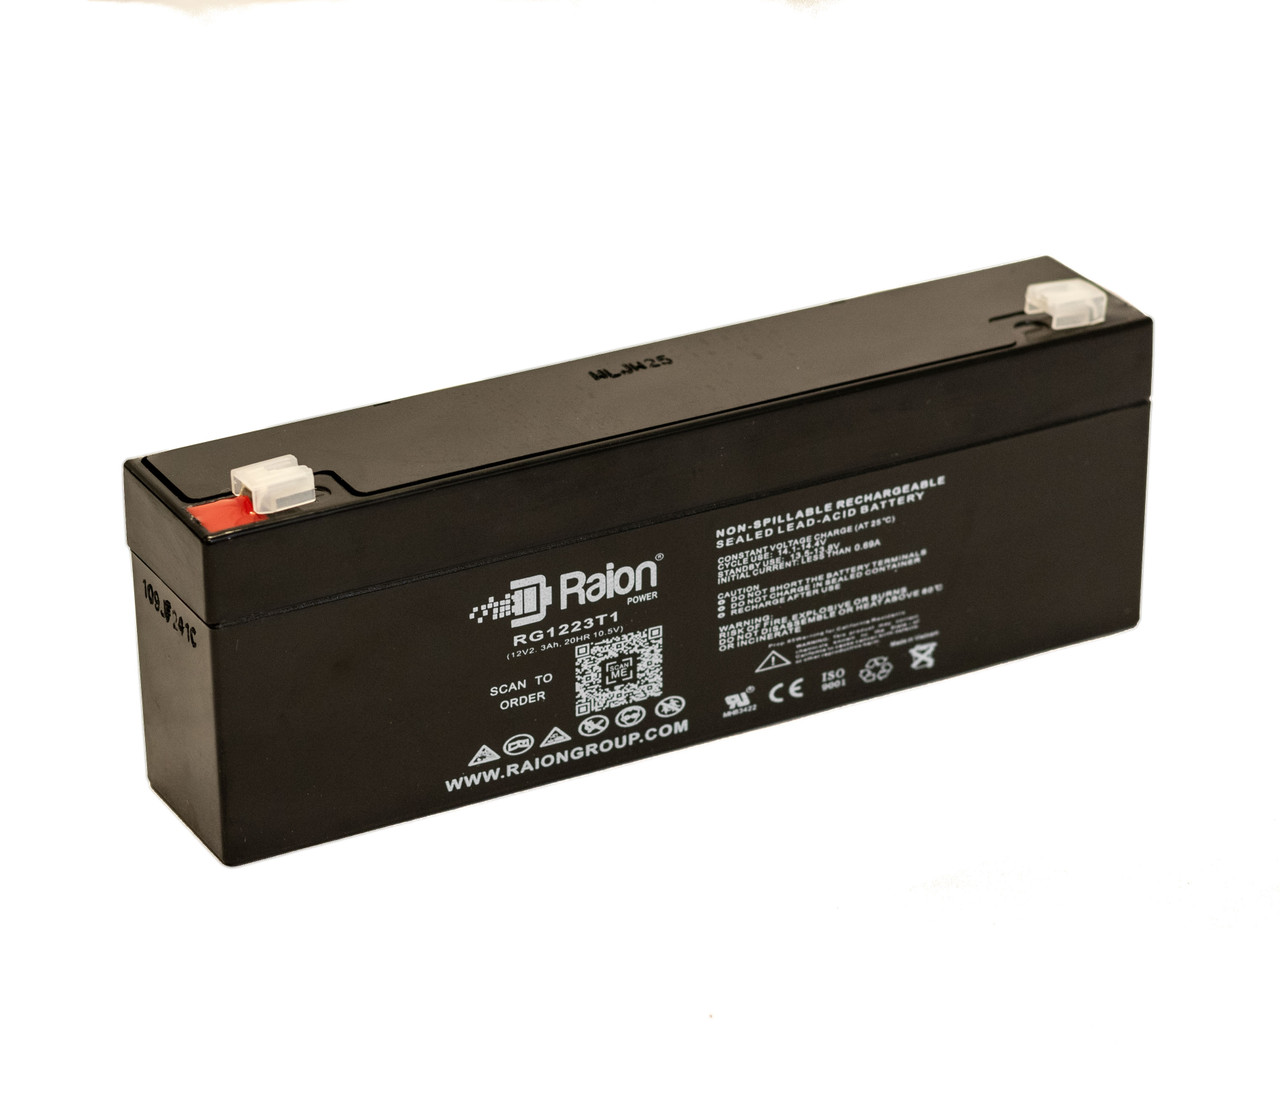 Raion Power RG1223T1 Replacement Battery for RPower GIV1223V